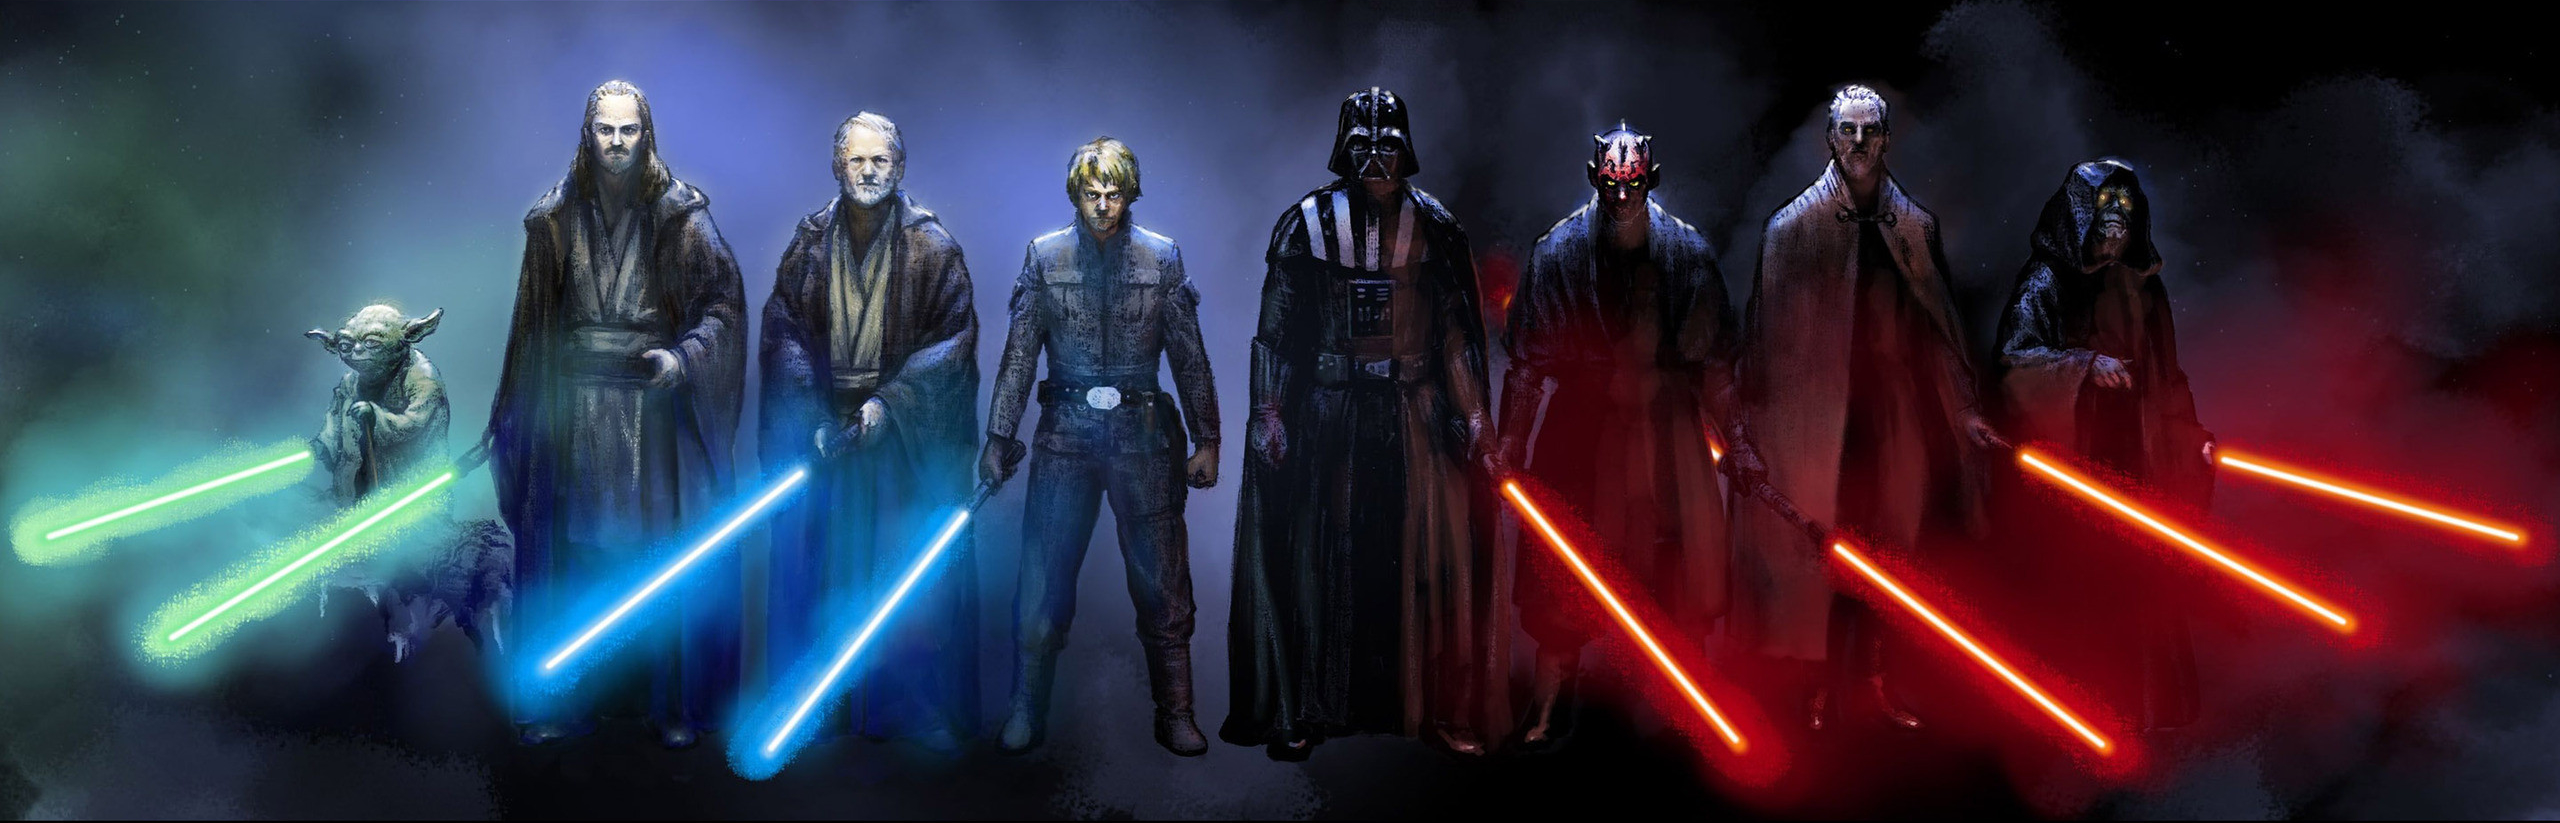 Sith Lords Wallpaper and Background 2560x823 ID496826